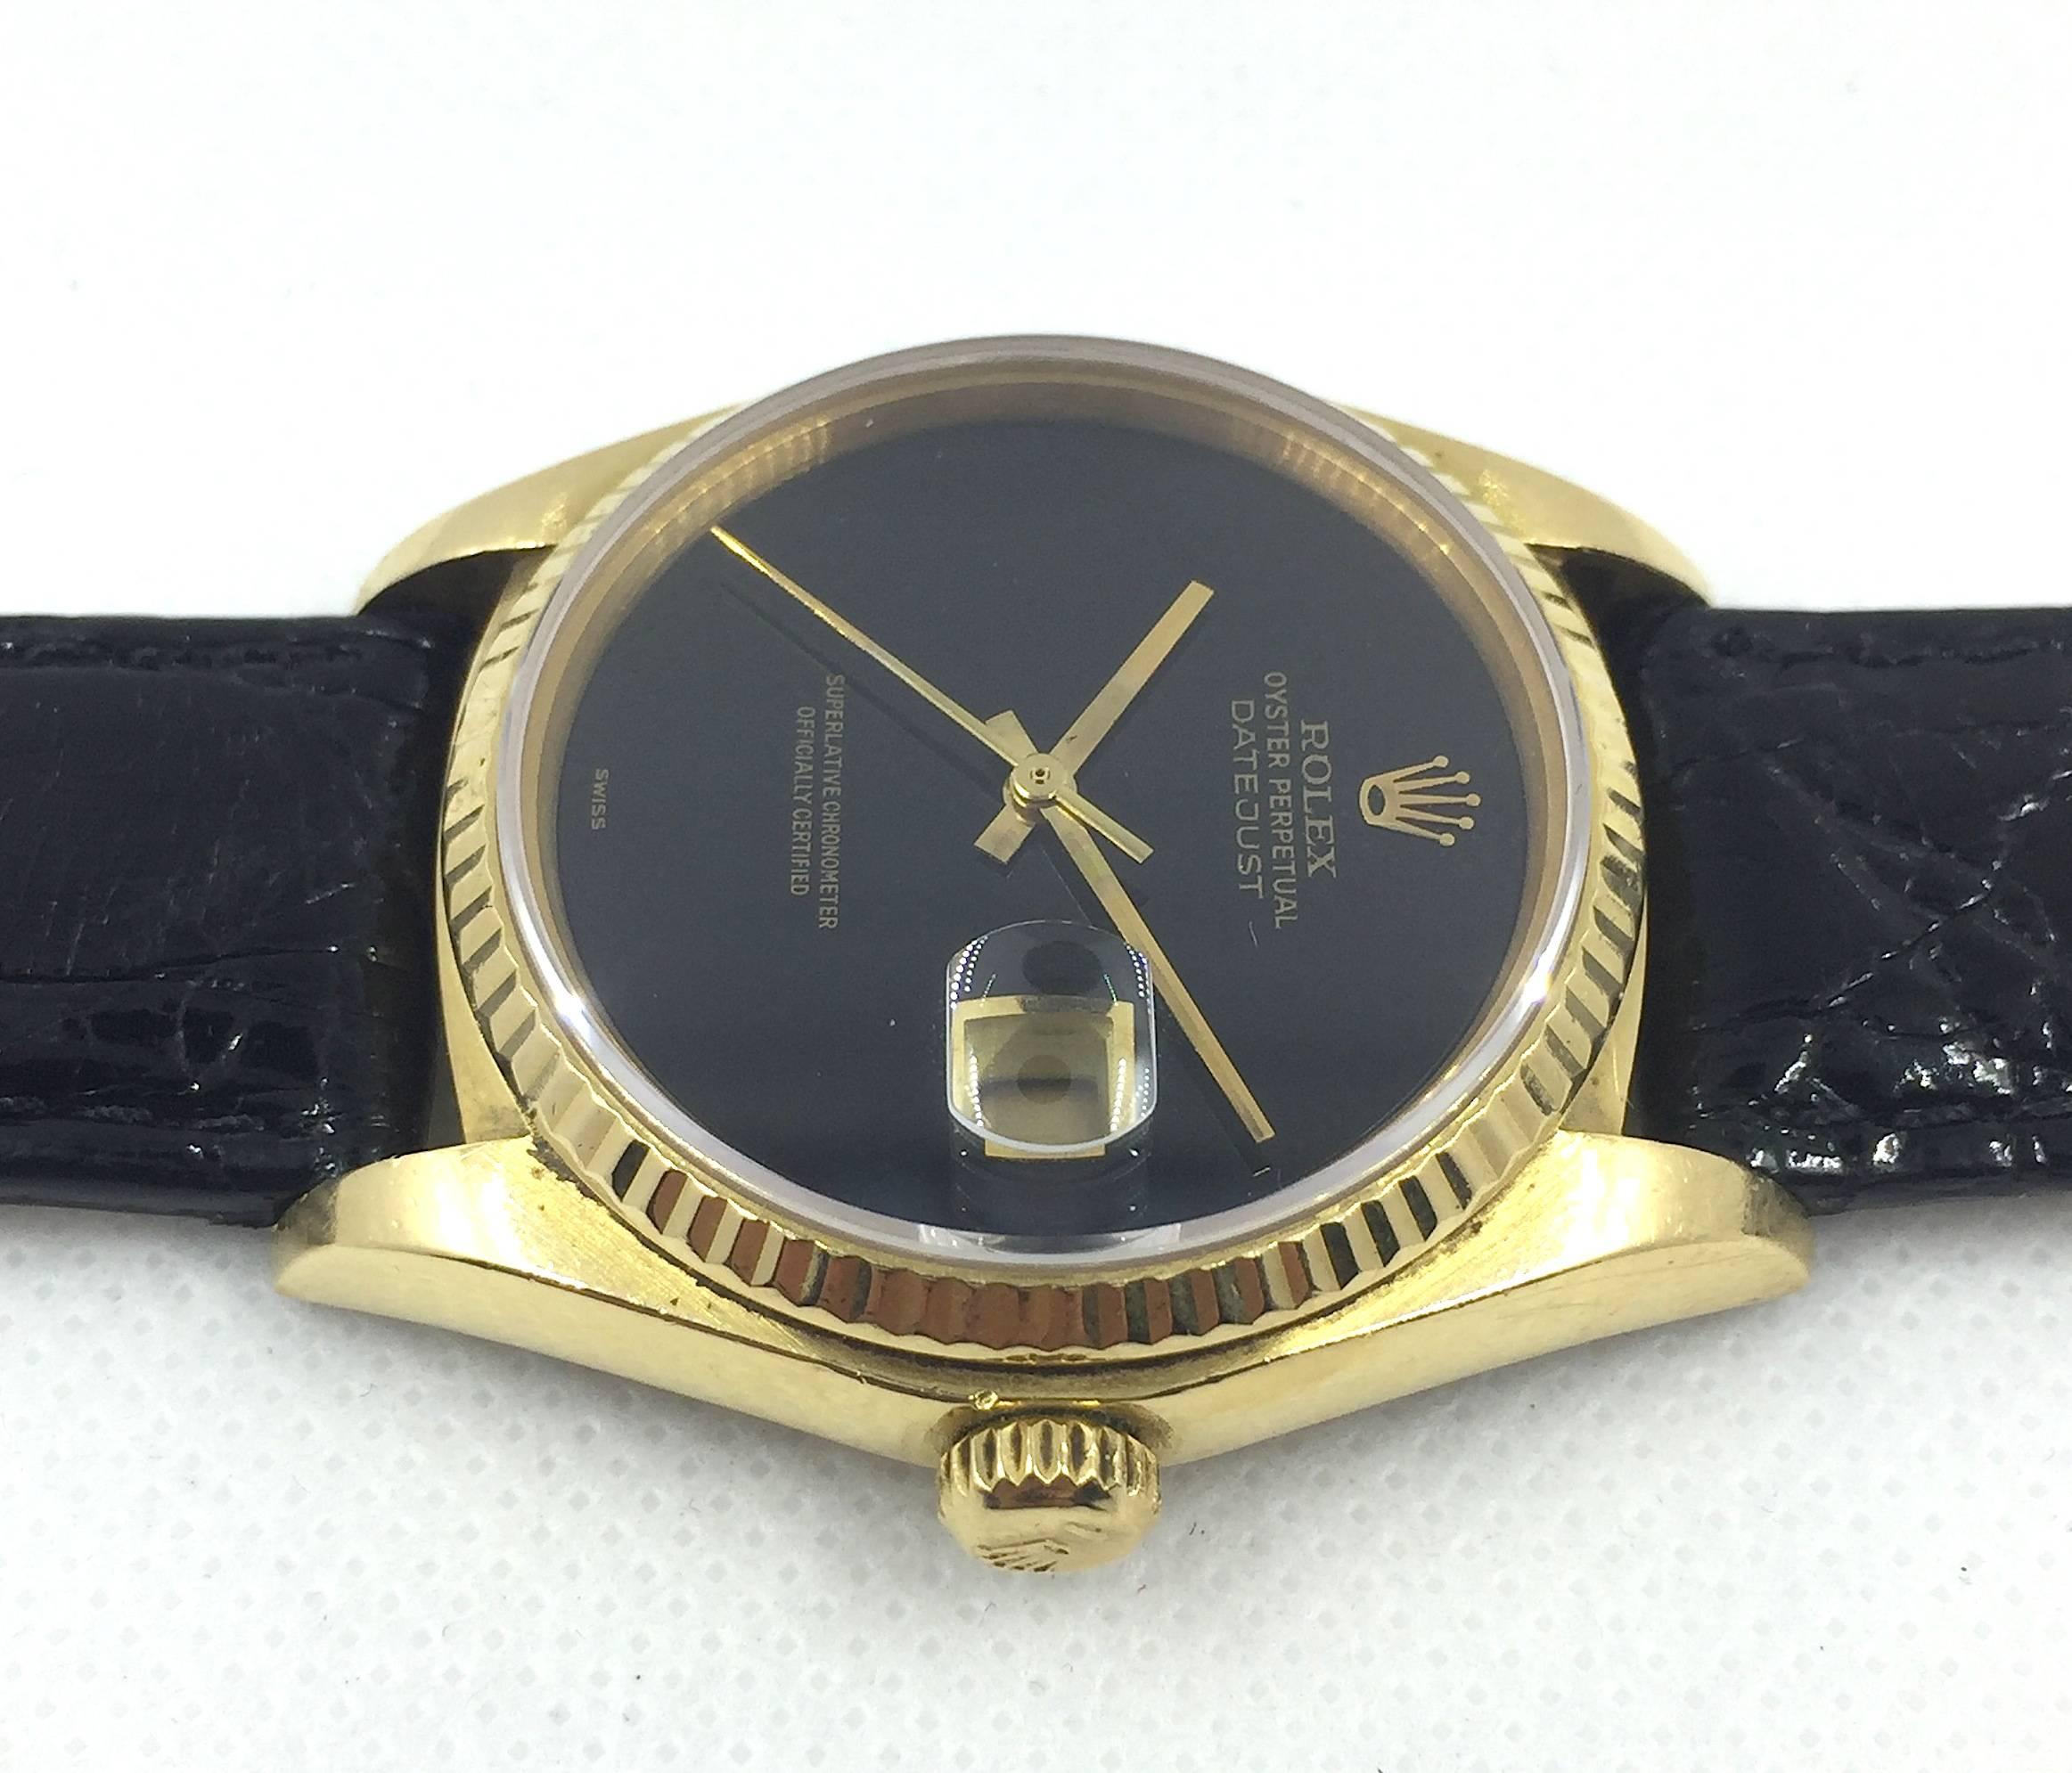 Rolex 18K Yellow Gold Oyster Perpetual Datejust Wristwatch
Factory Black Onyx Stone Dial
18K Yellow Gold Fluted Bezel
36mm in size 
Rolex Calibre Base 3035 Automatic Movement
Sapphire Crystal
1980's Production
Comes Fitted on Handmade Black